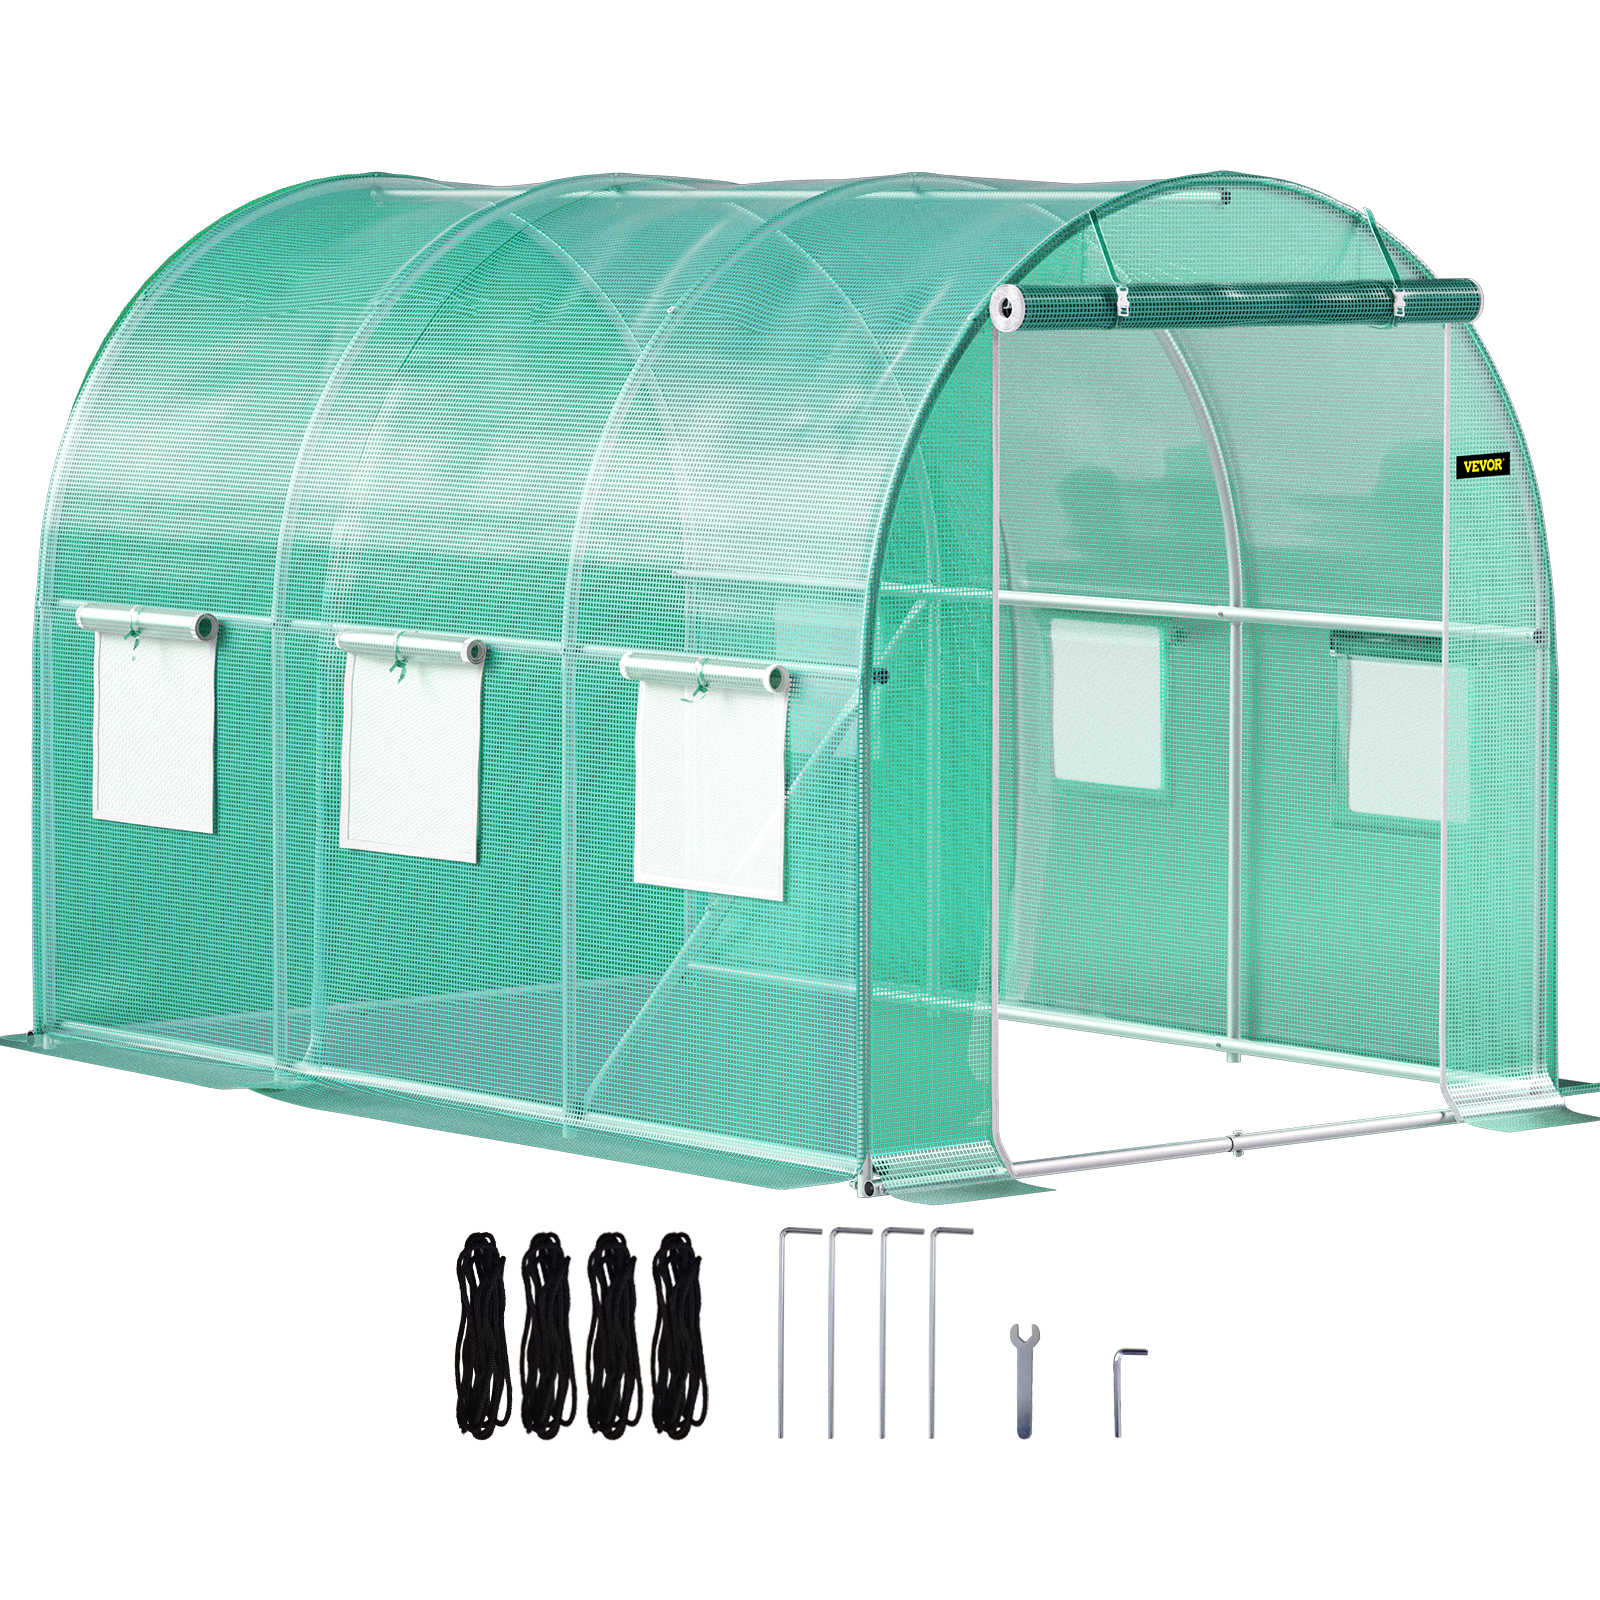 Poles,　Walk-in　Portable　Doors　Beam,　VEVOR　ft　Top　10　Greenhouse,　Hoops,　Windows,　Tunnel　Hot　Galvanized　Zippered　House　Diagonal　w/　x　10　CA　Green　VEVOR　x　Steel　Plant　Roll-up